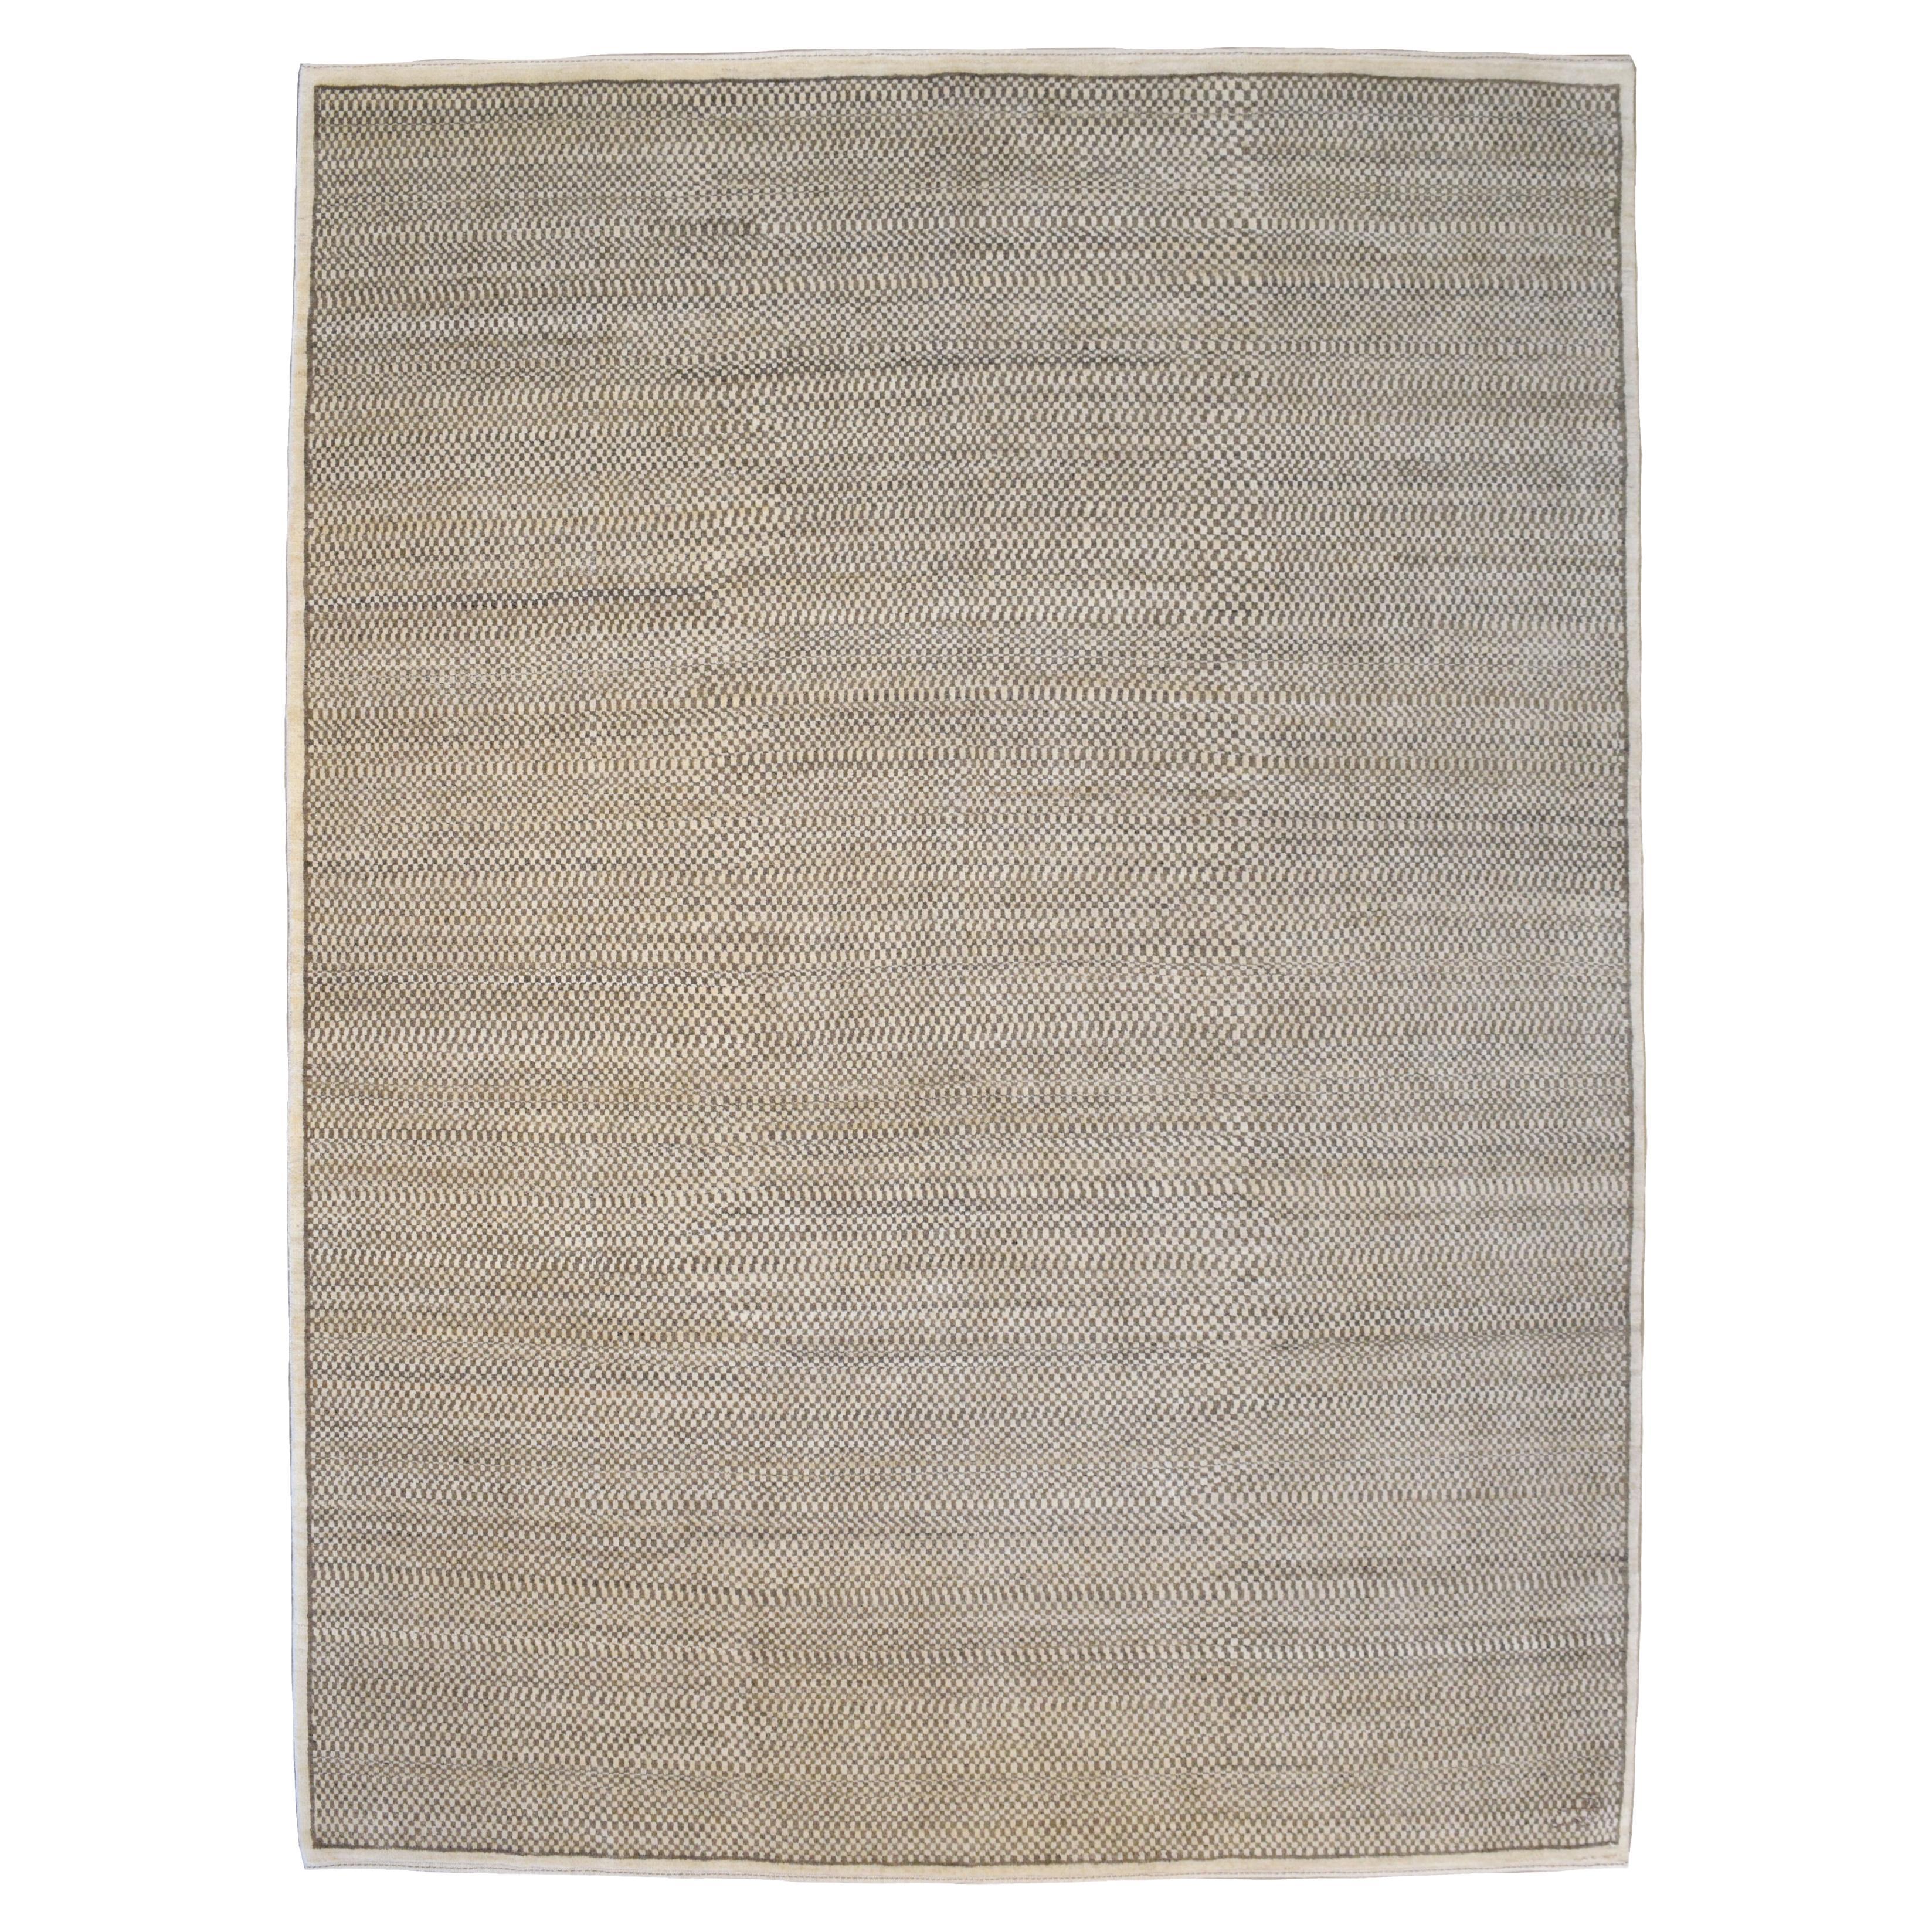 Brown and Cream Simple Geometric "Mottle" Modern Persian Wool Area Rug, 8x10 For Sale